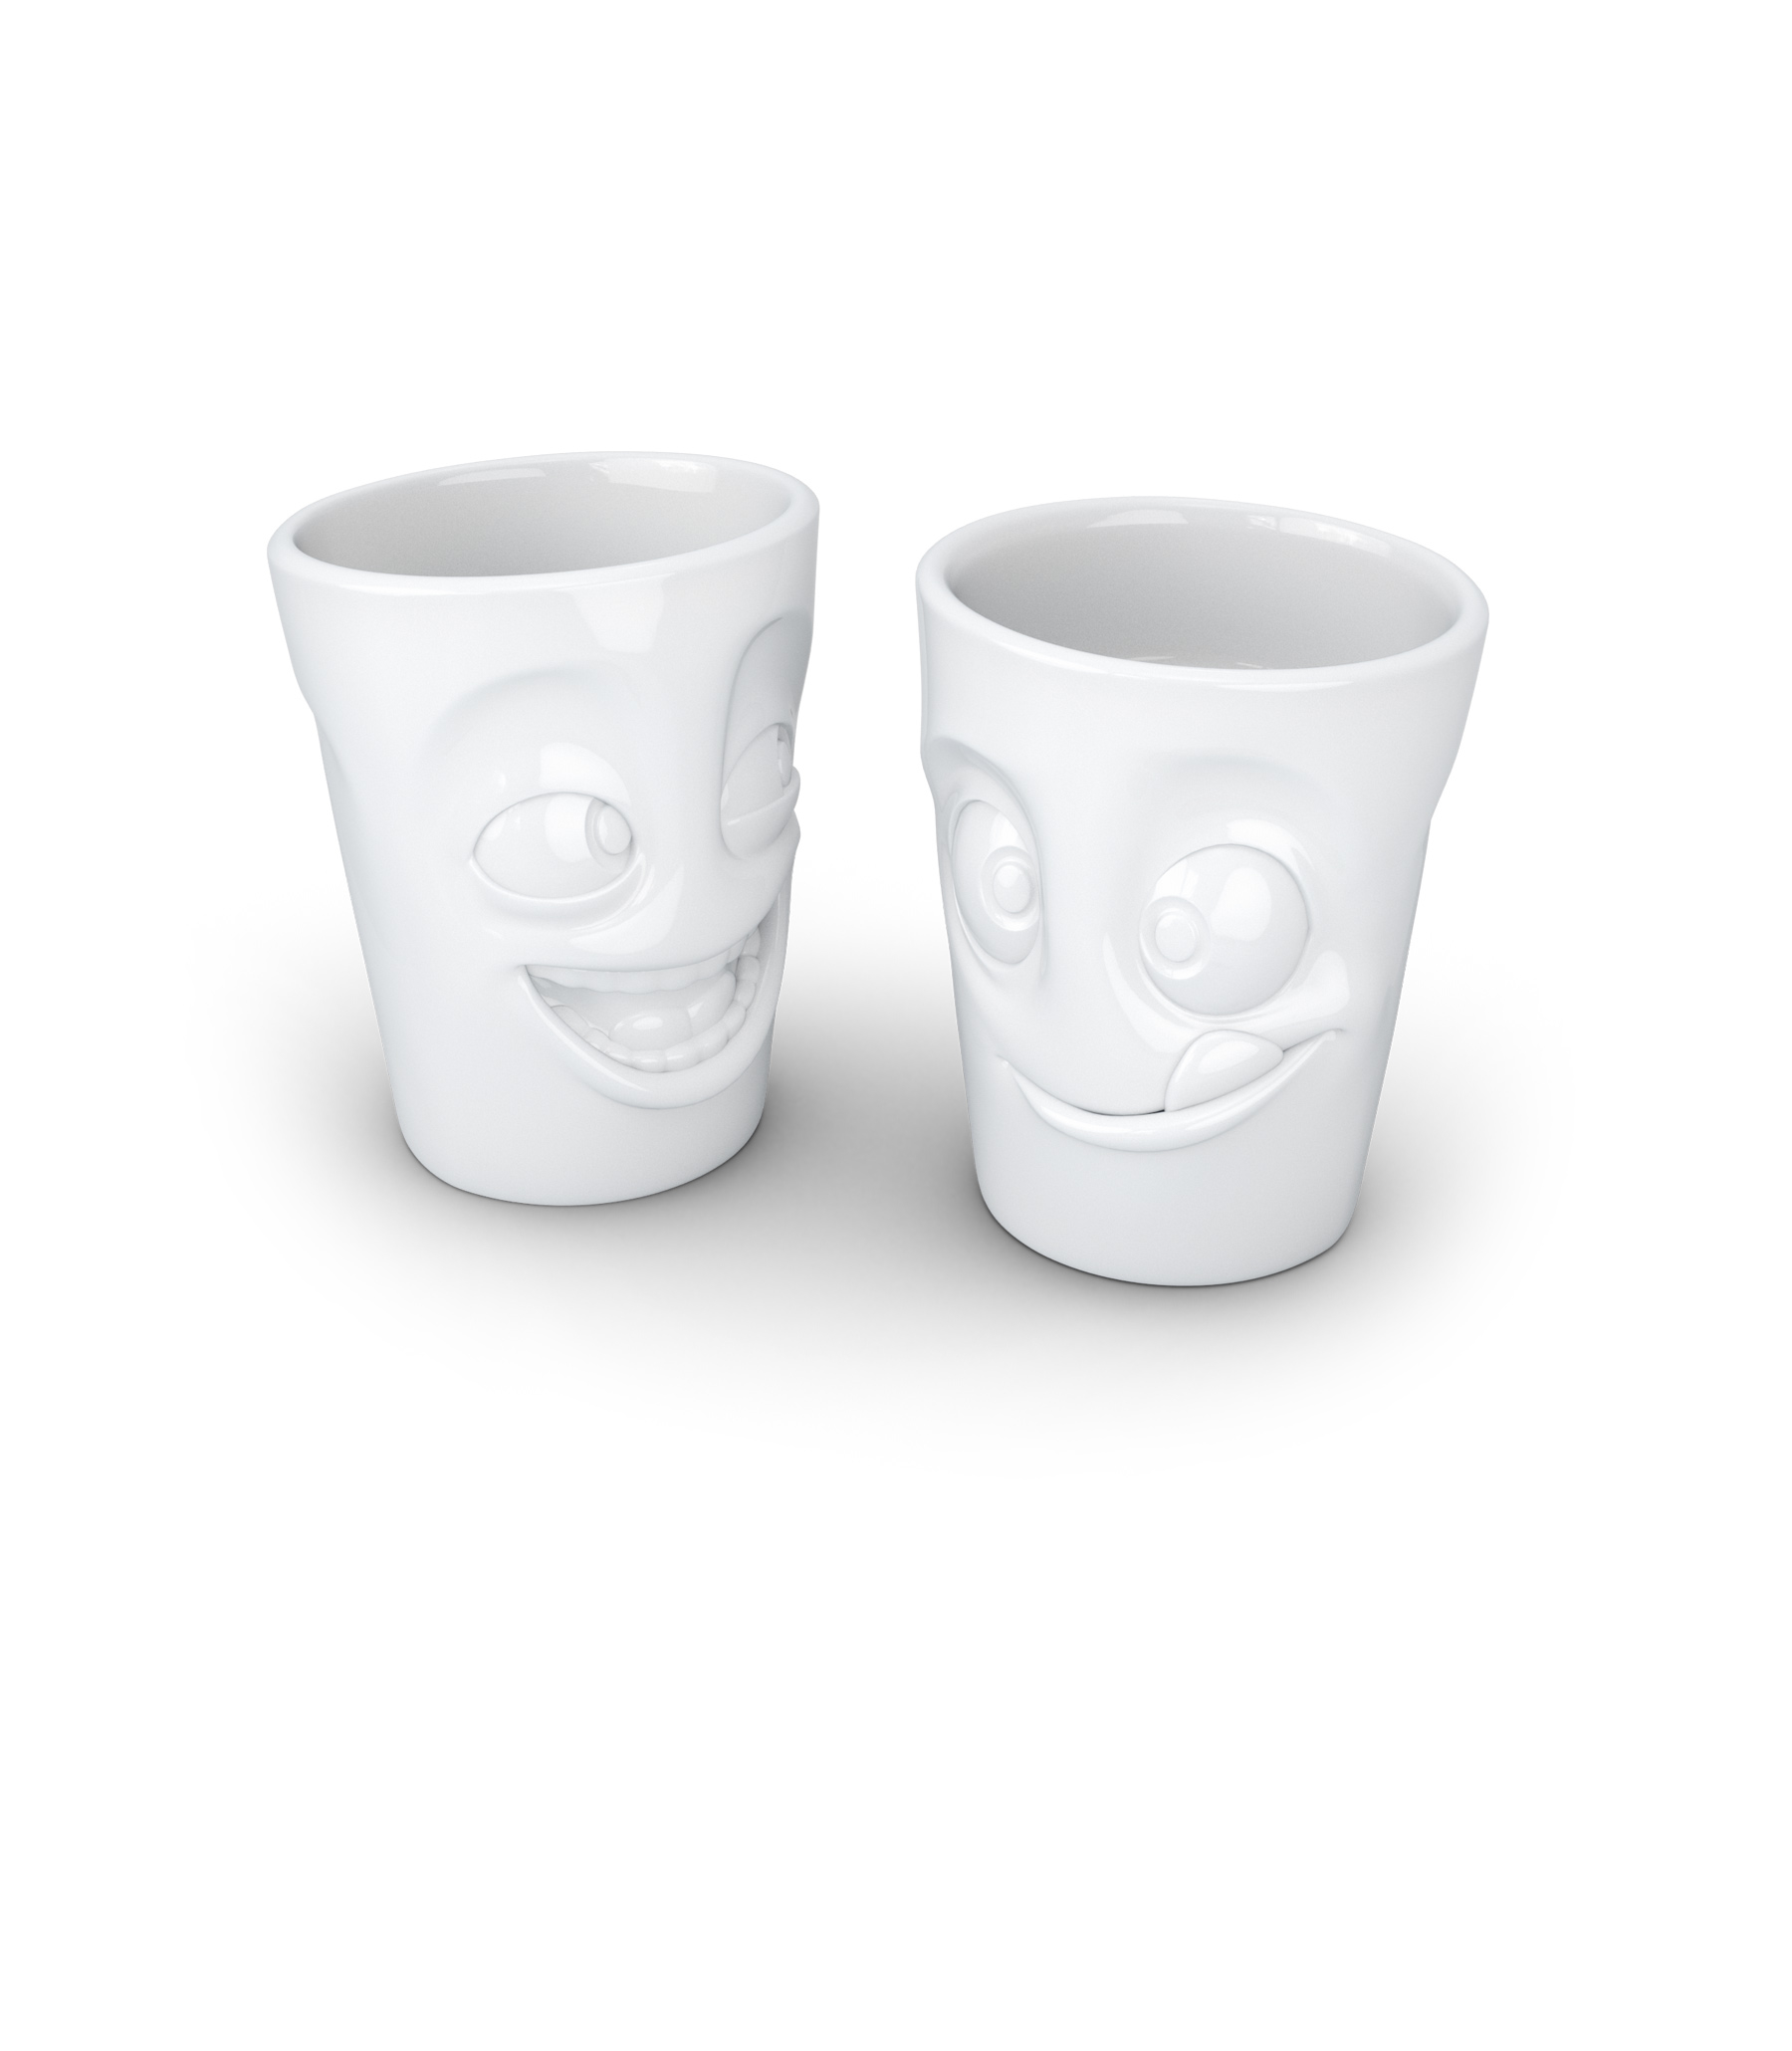 Set 2 mugs Rieur & Gourmand - Tassen by Fiftyeight Products